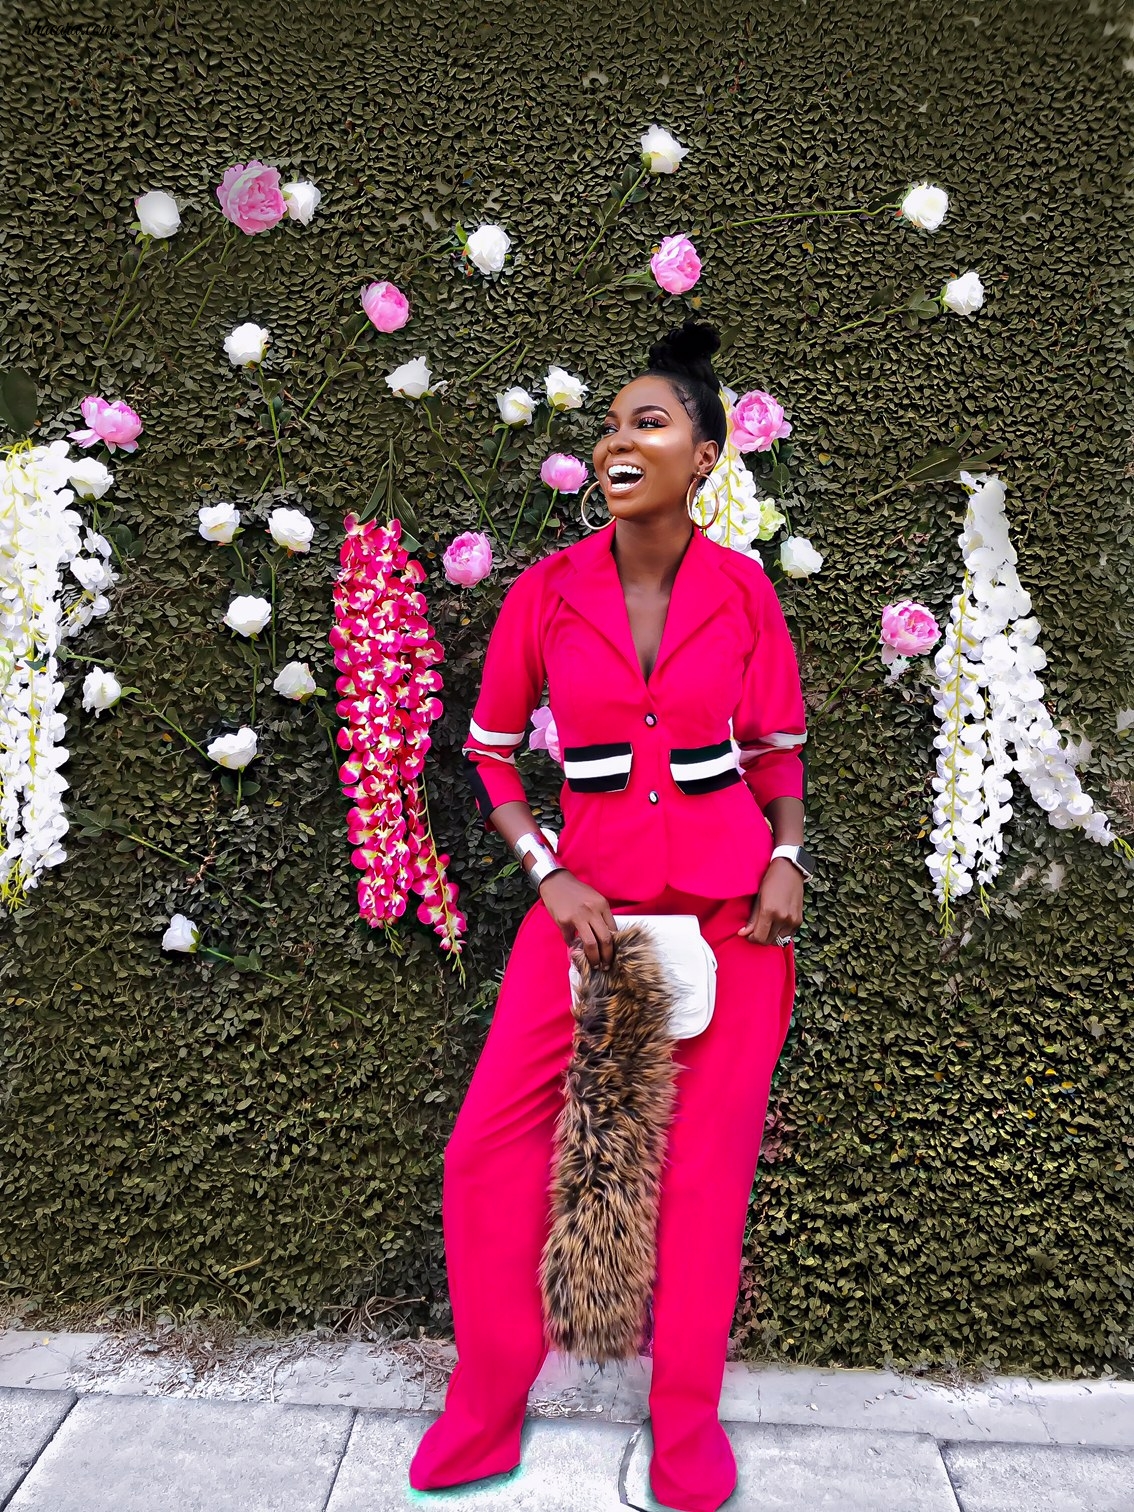 Abbyke Domina Release Photos From Her Pop Of Color & Floral Designs